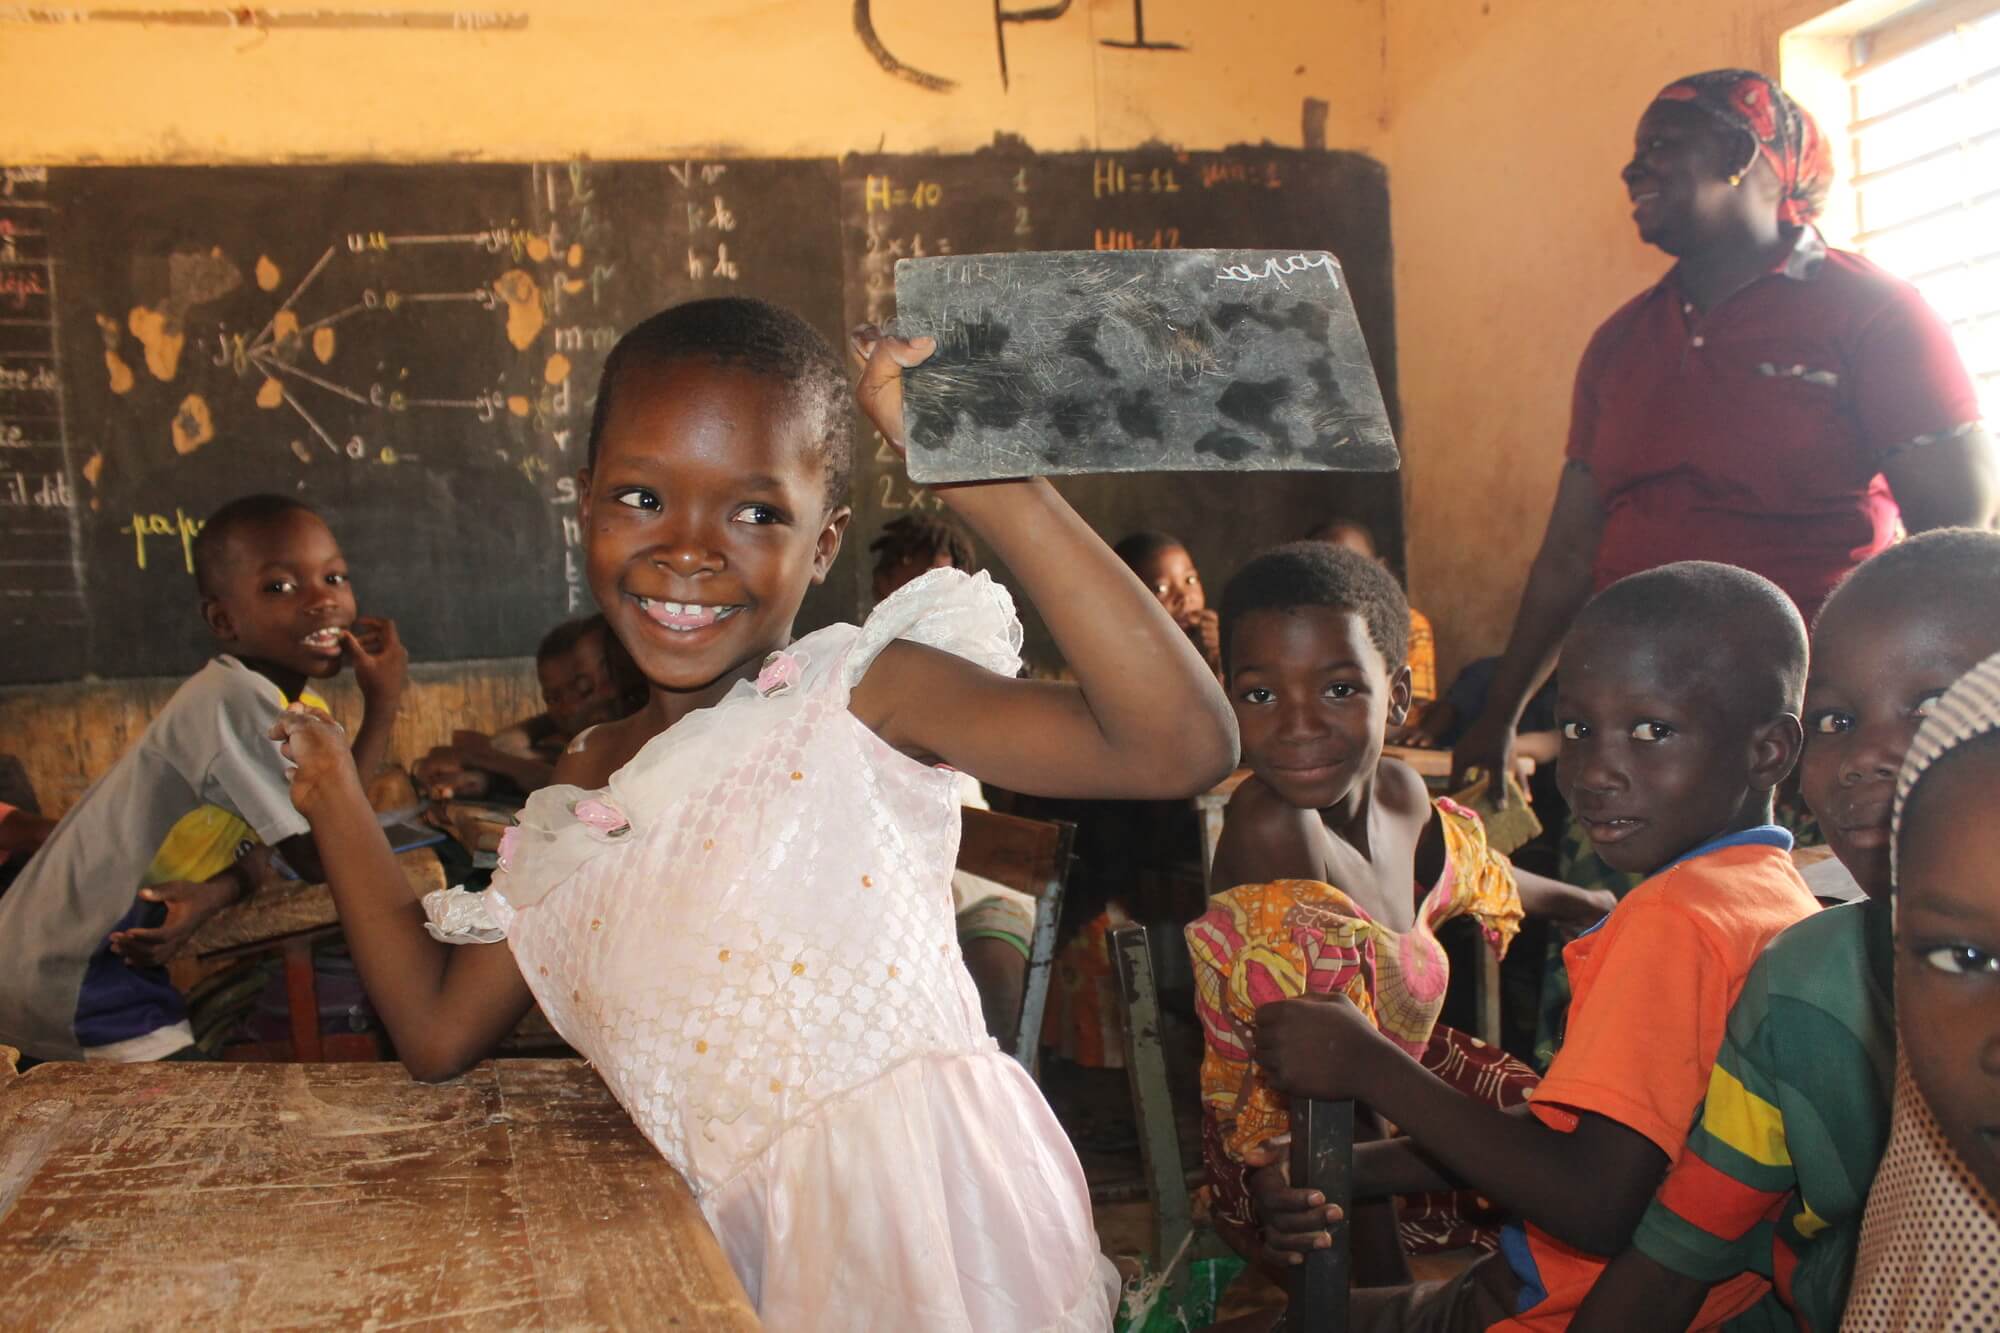 Image of Adissa Kabore, a young girl who has hemiplegia, in a classroom. She is surrounded by classmates and proudly holding a small chalkboard. Adissa received rehabilitation from OCADES (CARITAS), a project partner of Light for the World working on inclusive education in Burkina Faso. She now attends primary school, where her rehabilitation is supported by teachers. Copyright for the photo is Light for the World 